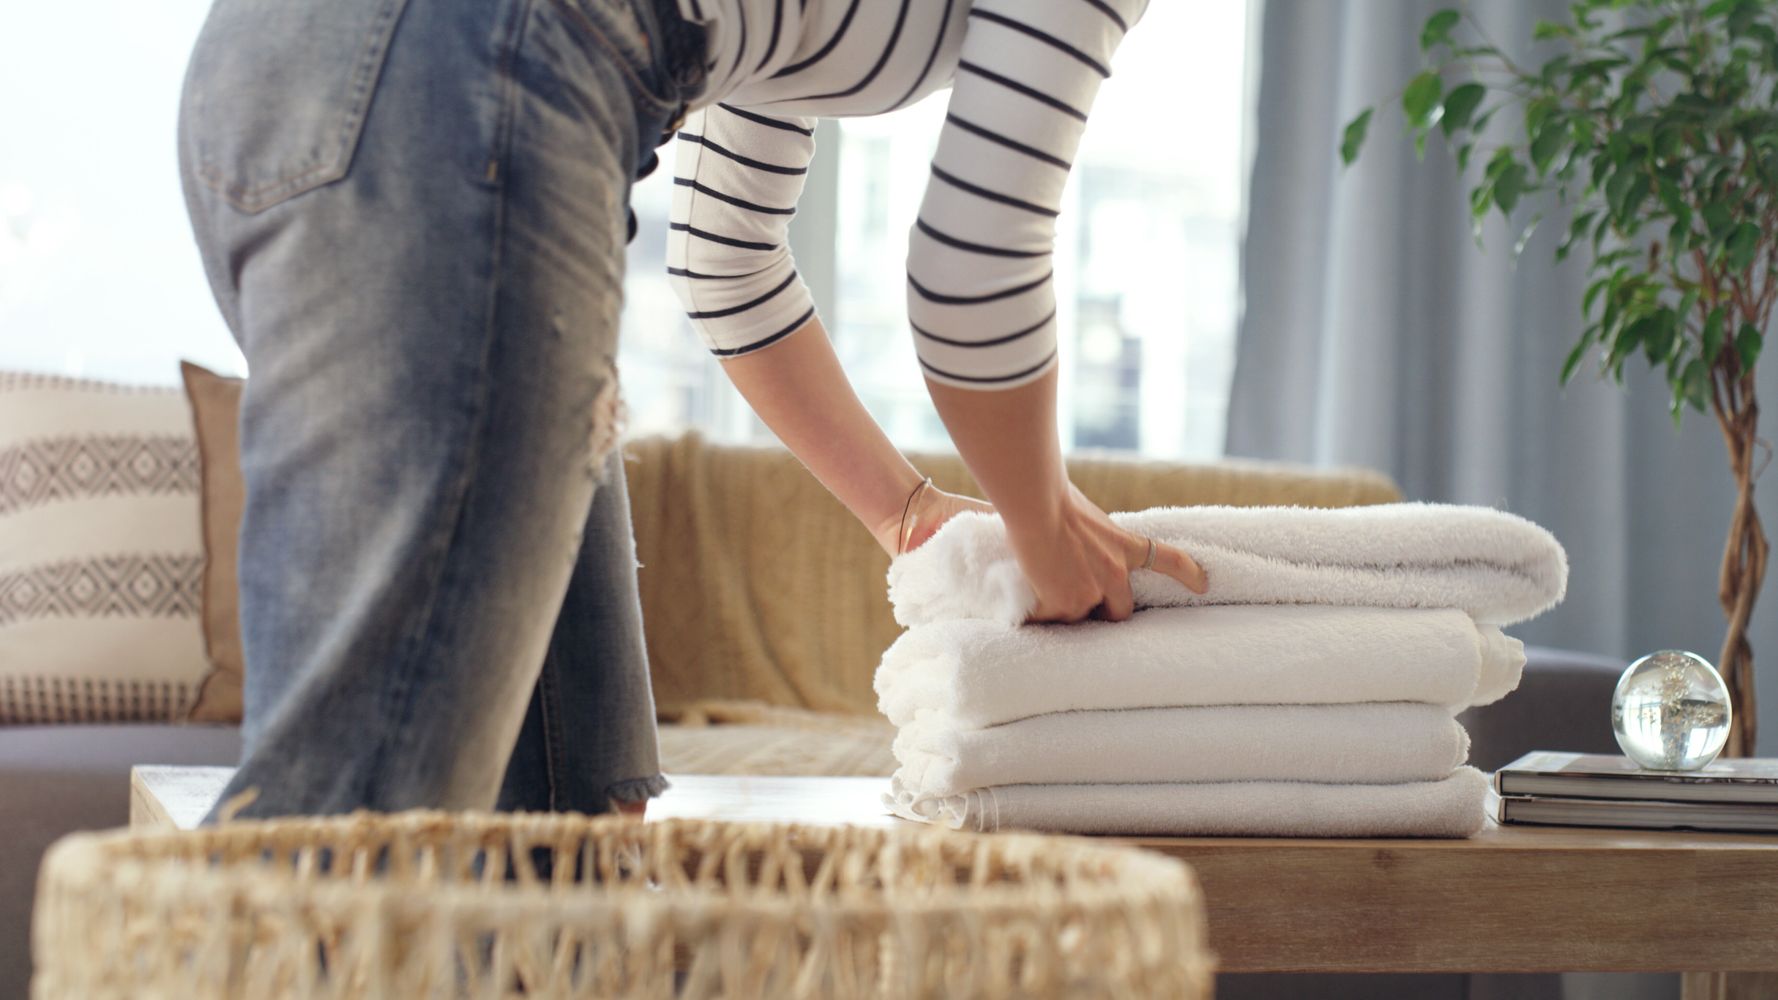 Here's How To Do Laundry By Hand So You Don't Miss A Spot